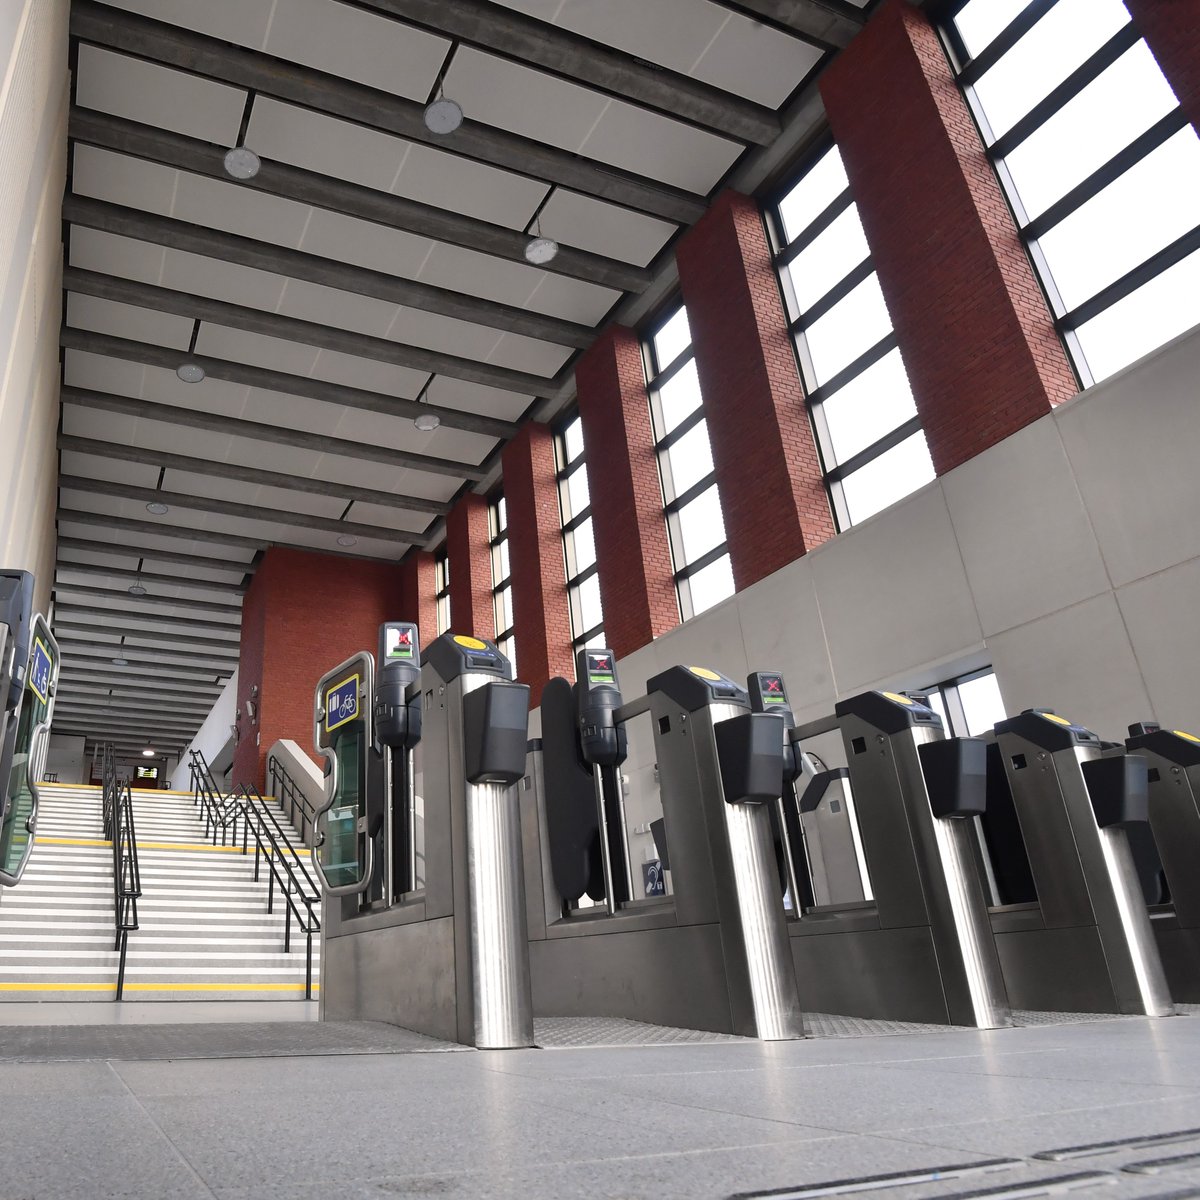 📣 Attention please the next station is University - all change, all change! We've opened the doors on the brand new multi £m University station, so much space for activities! More > orlo.uk/IkkVQ *the old building will now be 'exit only' to help manage crowd flows.